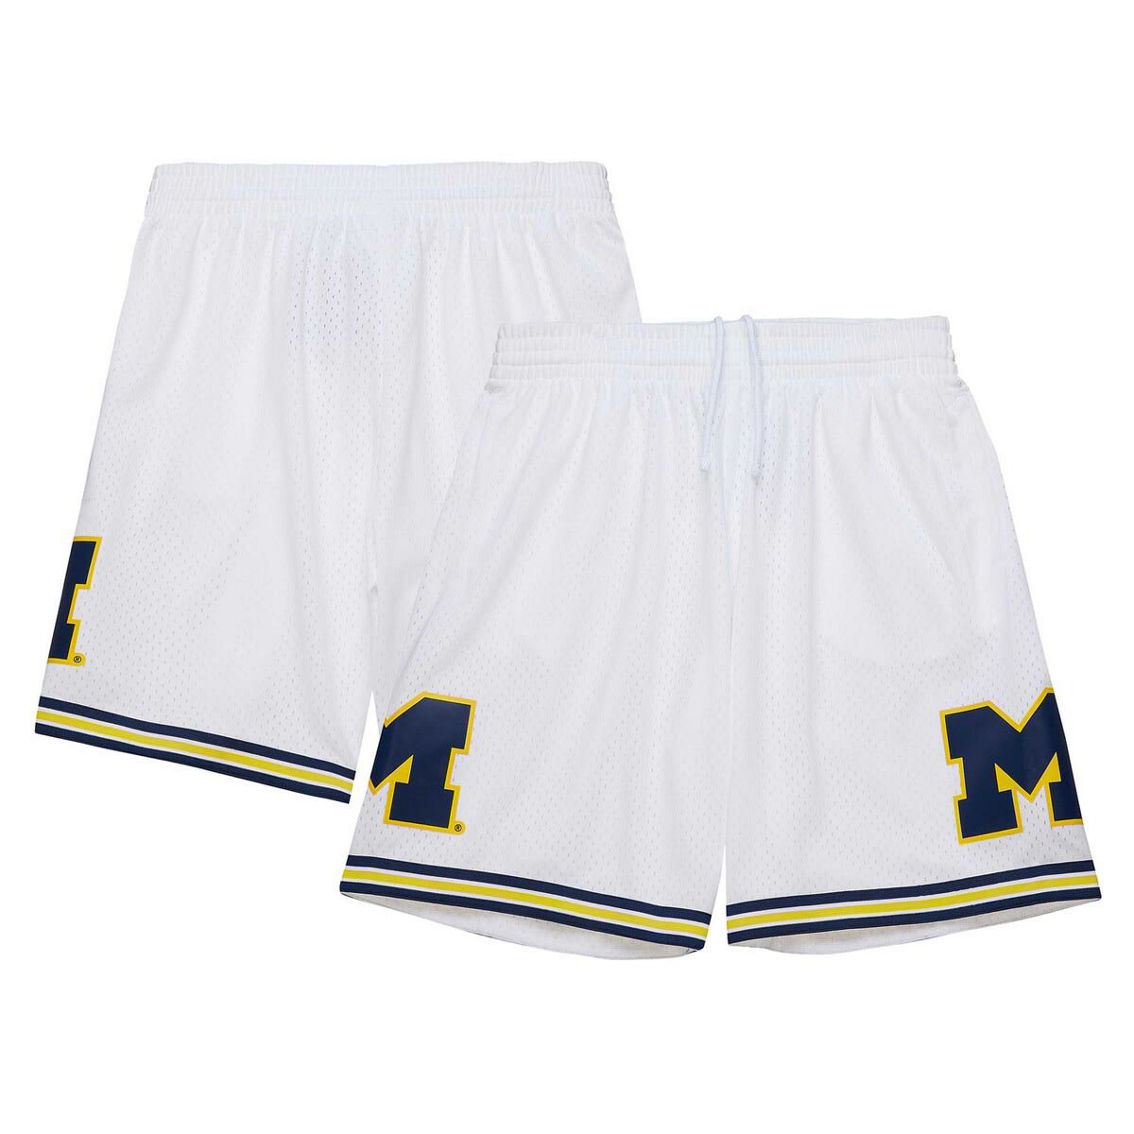 Mitchell & Ness Men's White Michigan Wolverines 1991/92 Throwback Jersey Shorts - Image 2 of 4